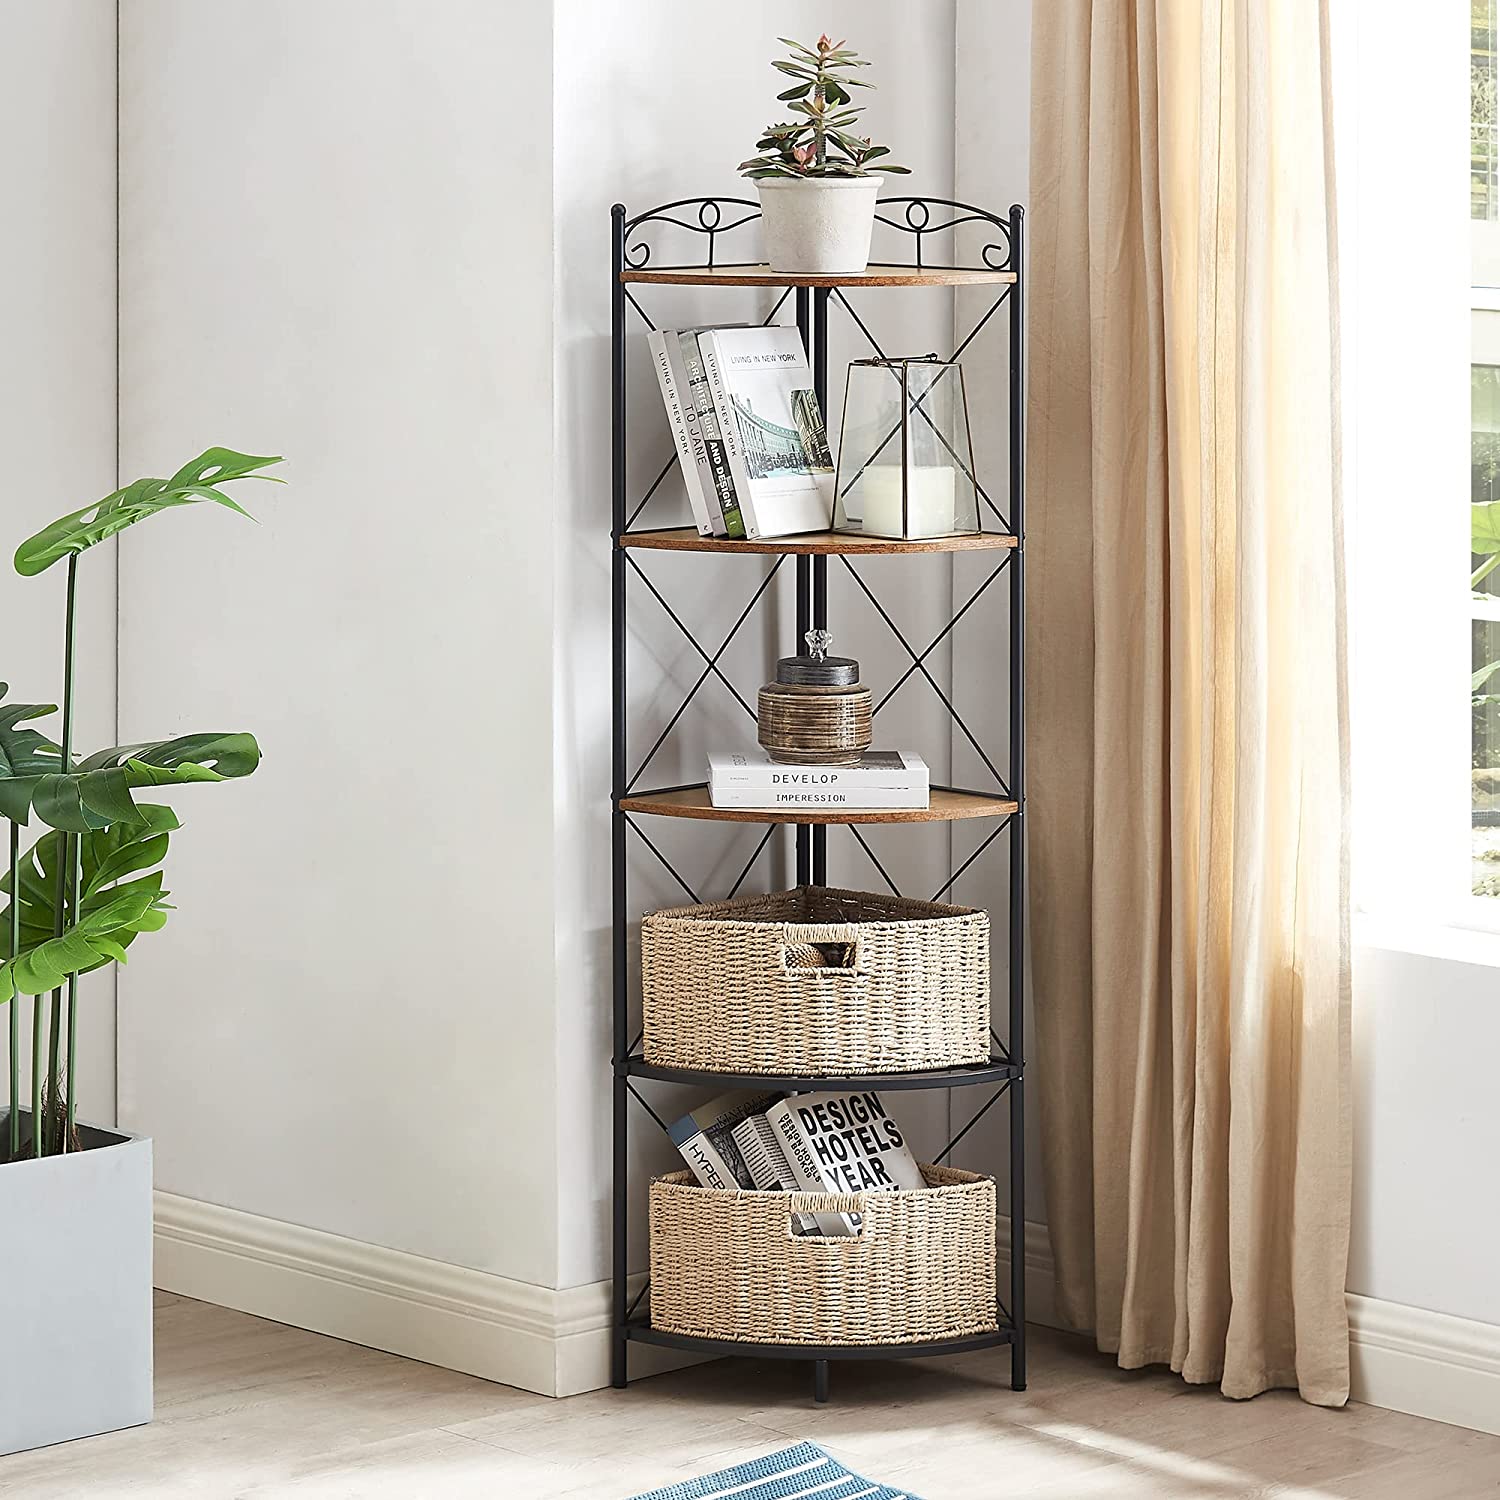 Free Standing Shelf Unit 3, 4 or 5 Shelves Fast Delivery 